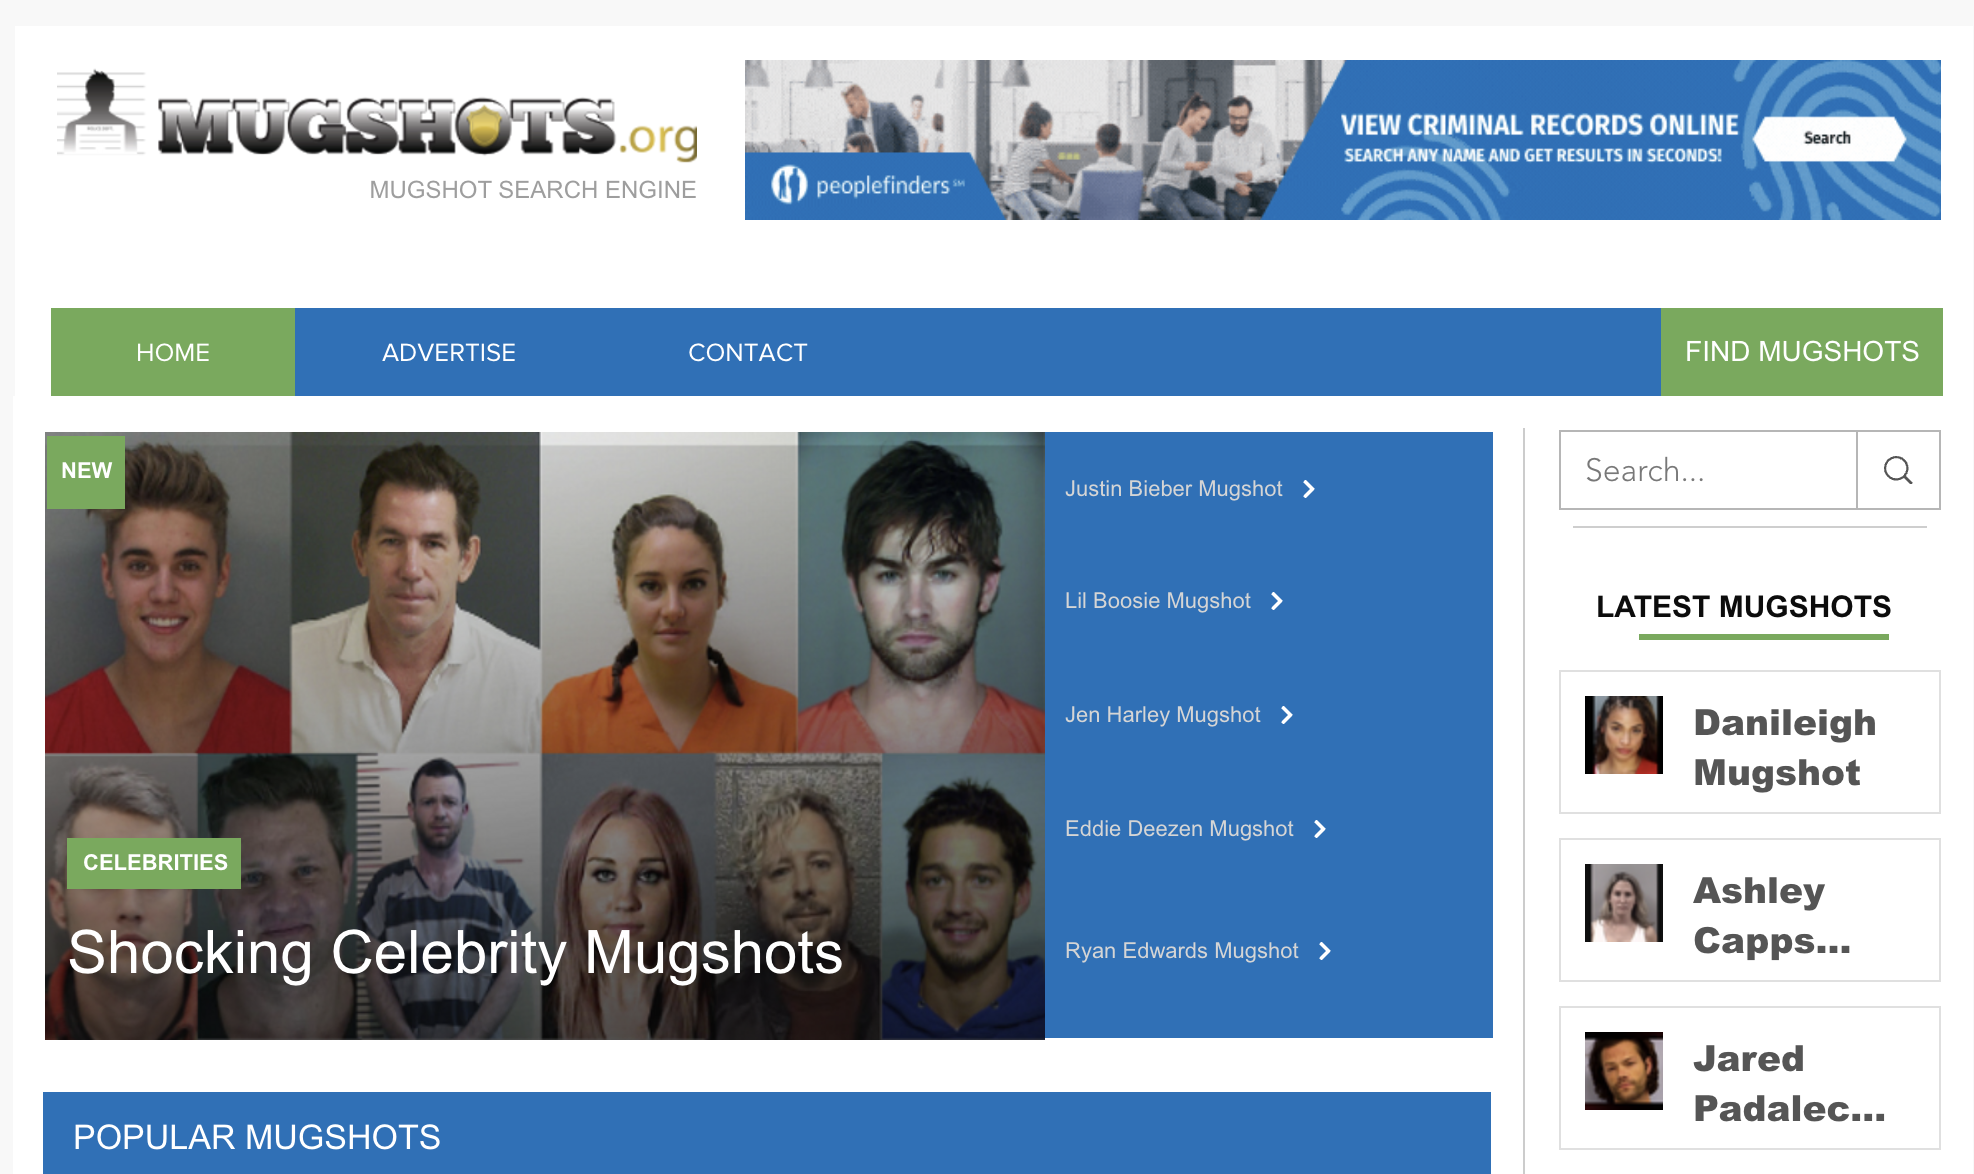 A website page featuring a search engine for mugshots with a header reading "Mugshots.org." The page shows thumbnails of celebrity mugshots, with a main headline stating "Shocking Celebrity Mugshots." A sidebar lists "Latest Mugshots," hints that mugshots are public record, and displays an ad at the top.